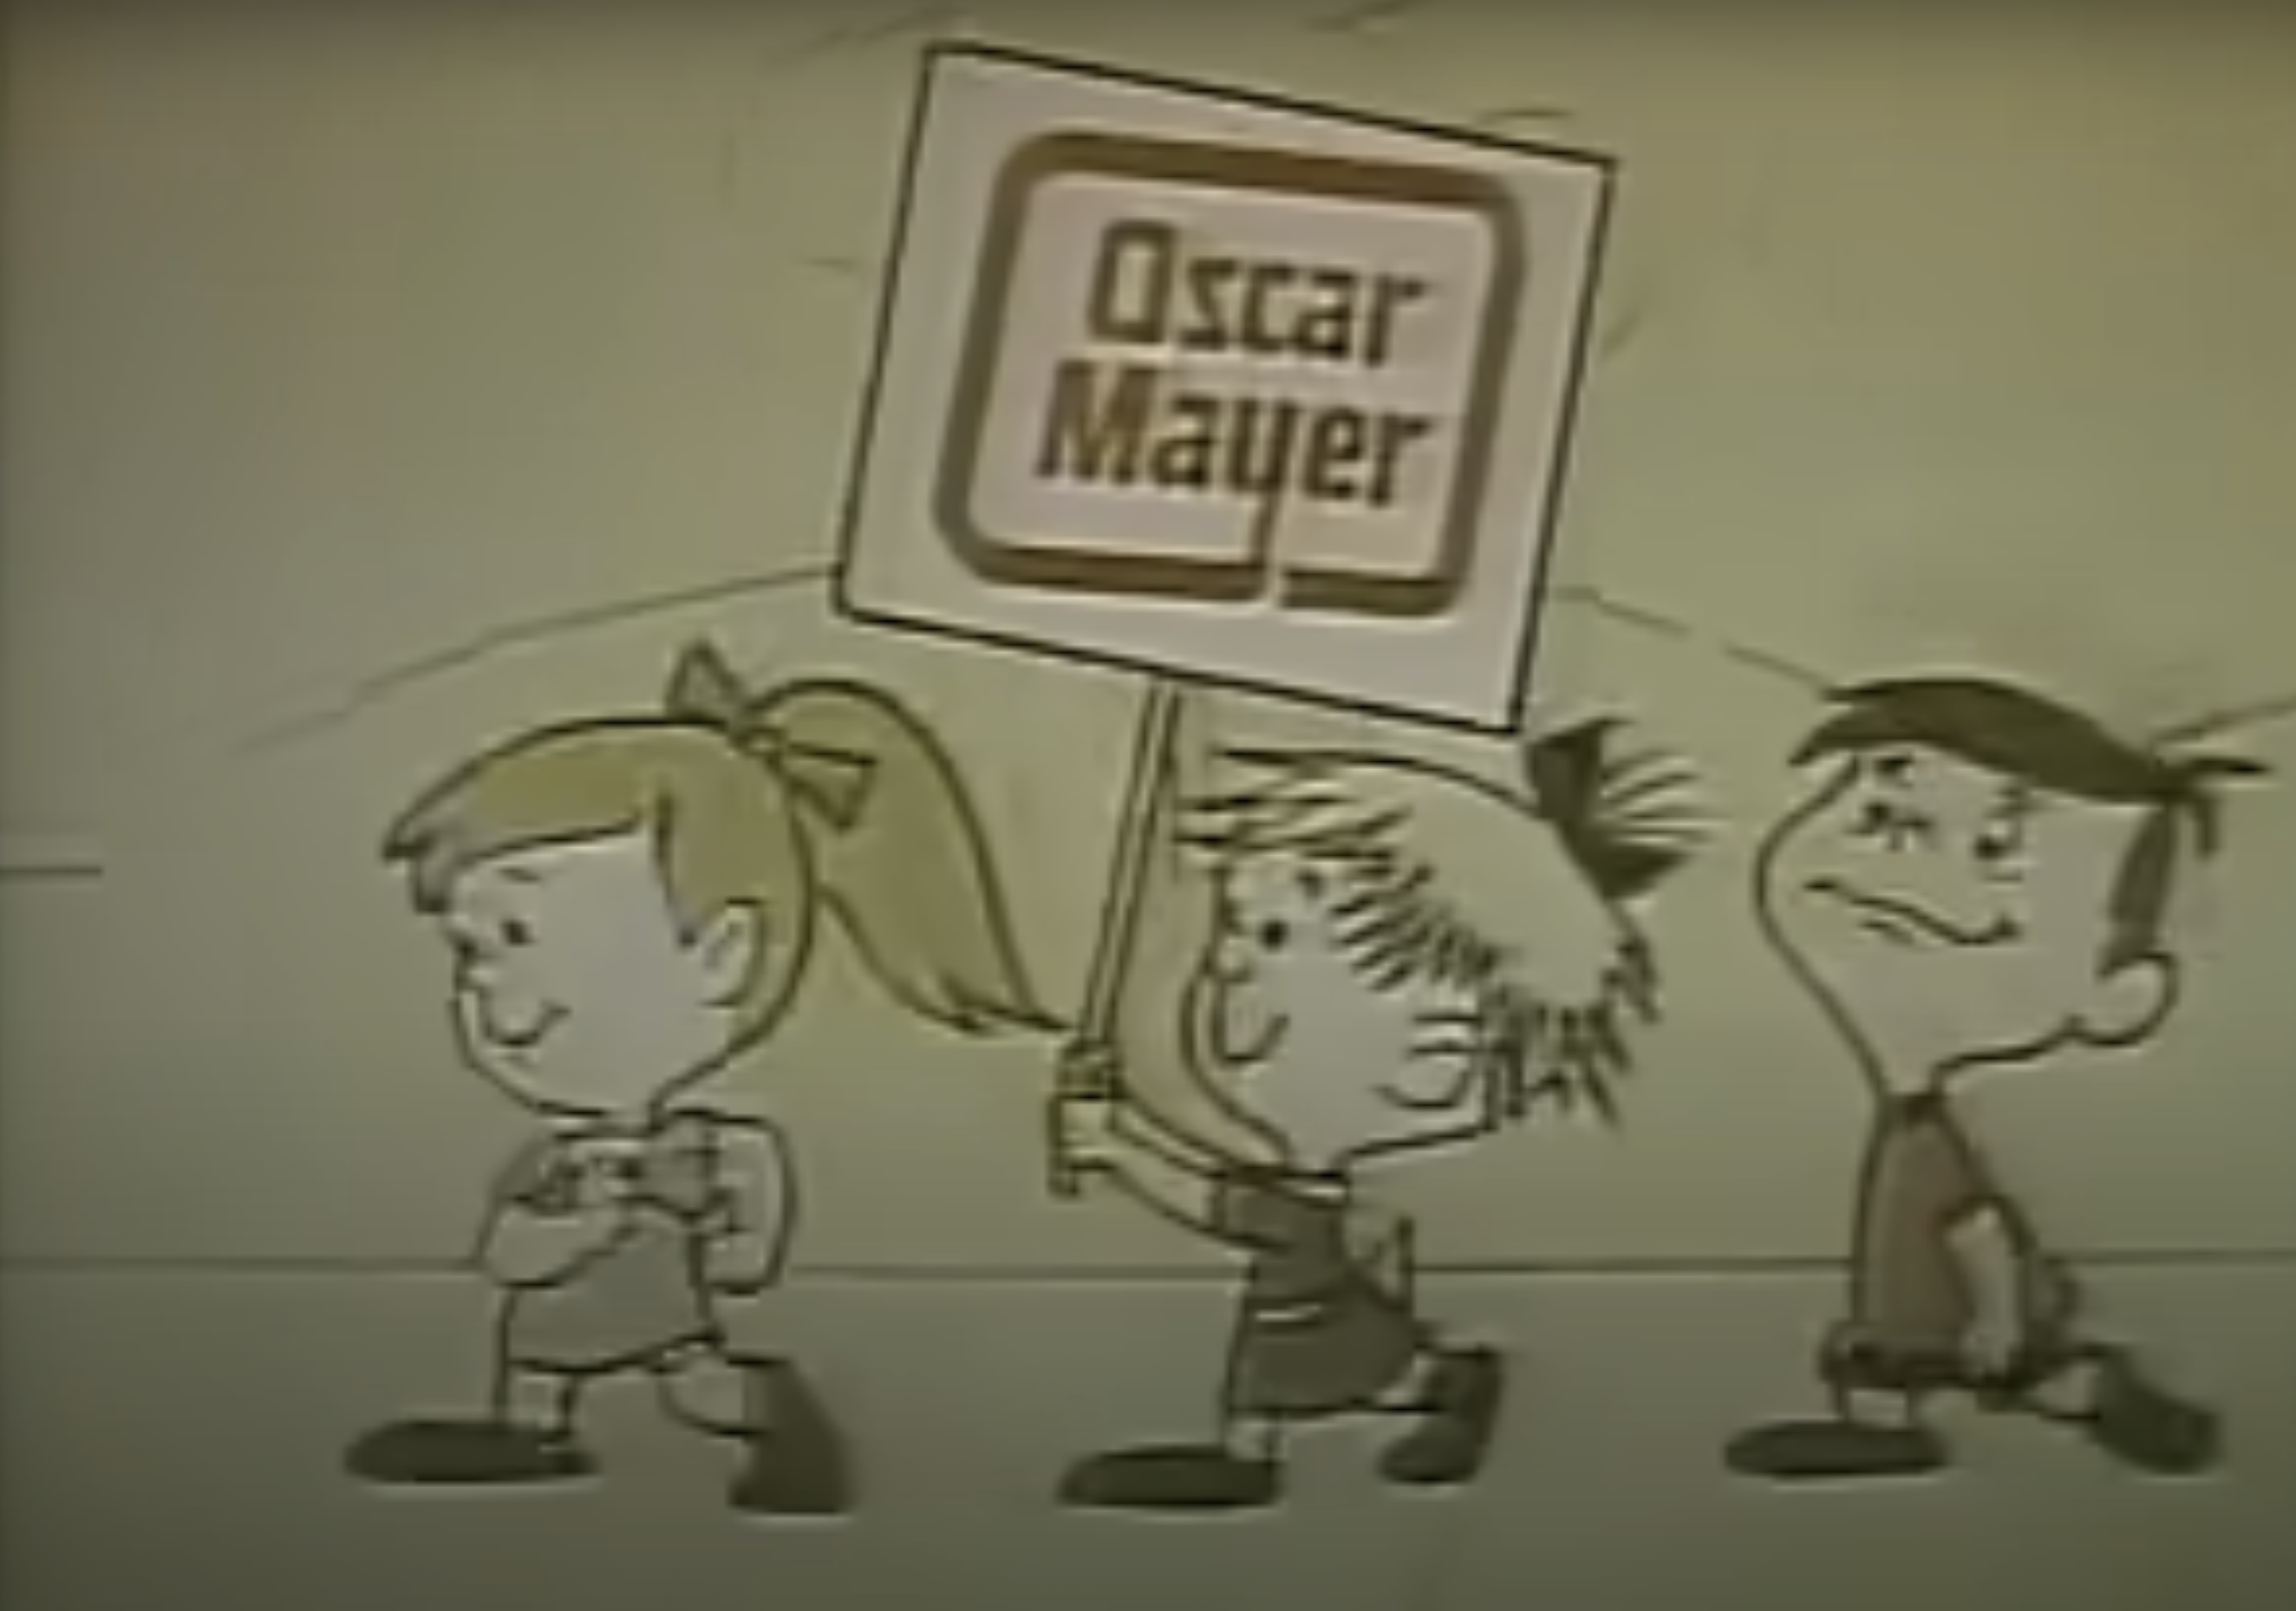 Animated children walk, one holding an &quot;Oscar Mayer&quot; sign. This image is likely from an old commercial